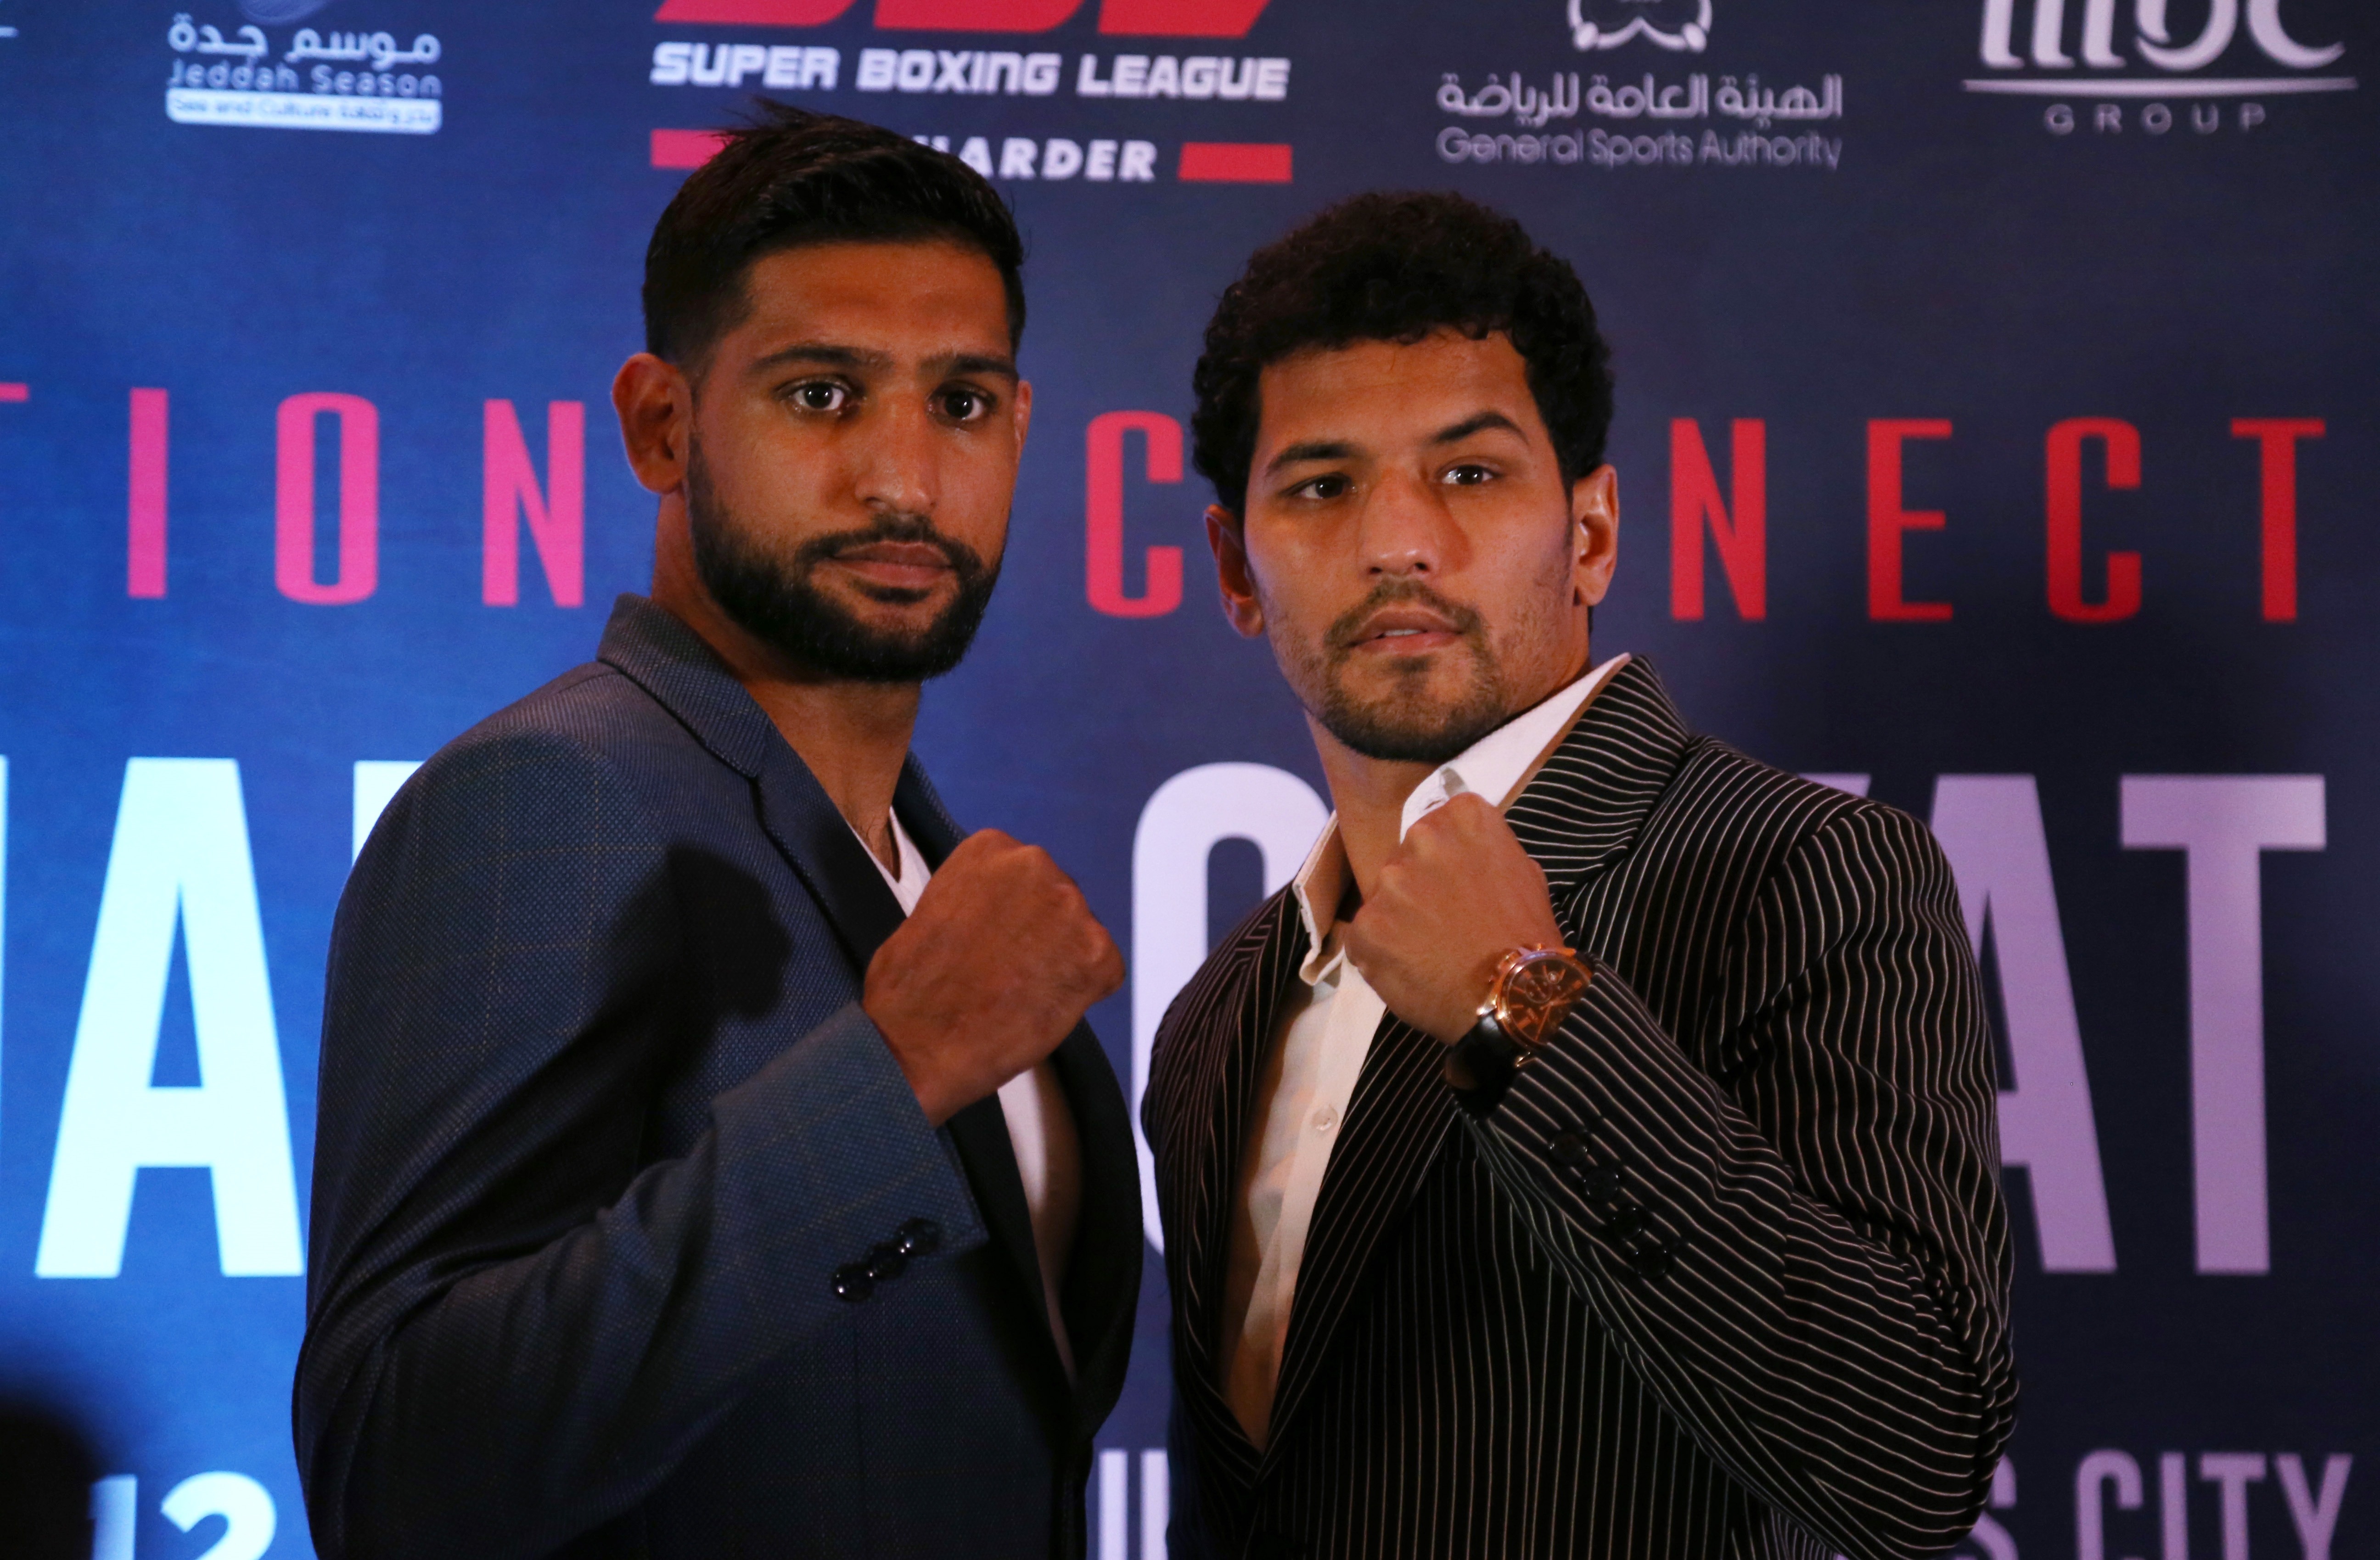 Goyat was lined up to fight Amir Khan in 2019 before their fight was cancelled